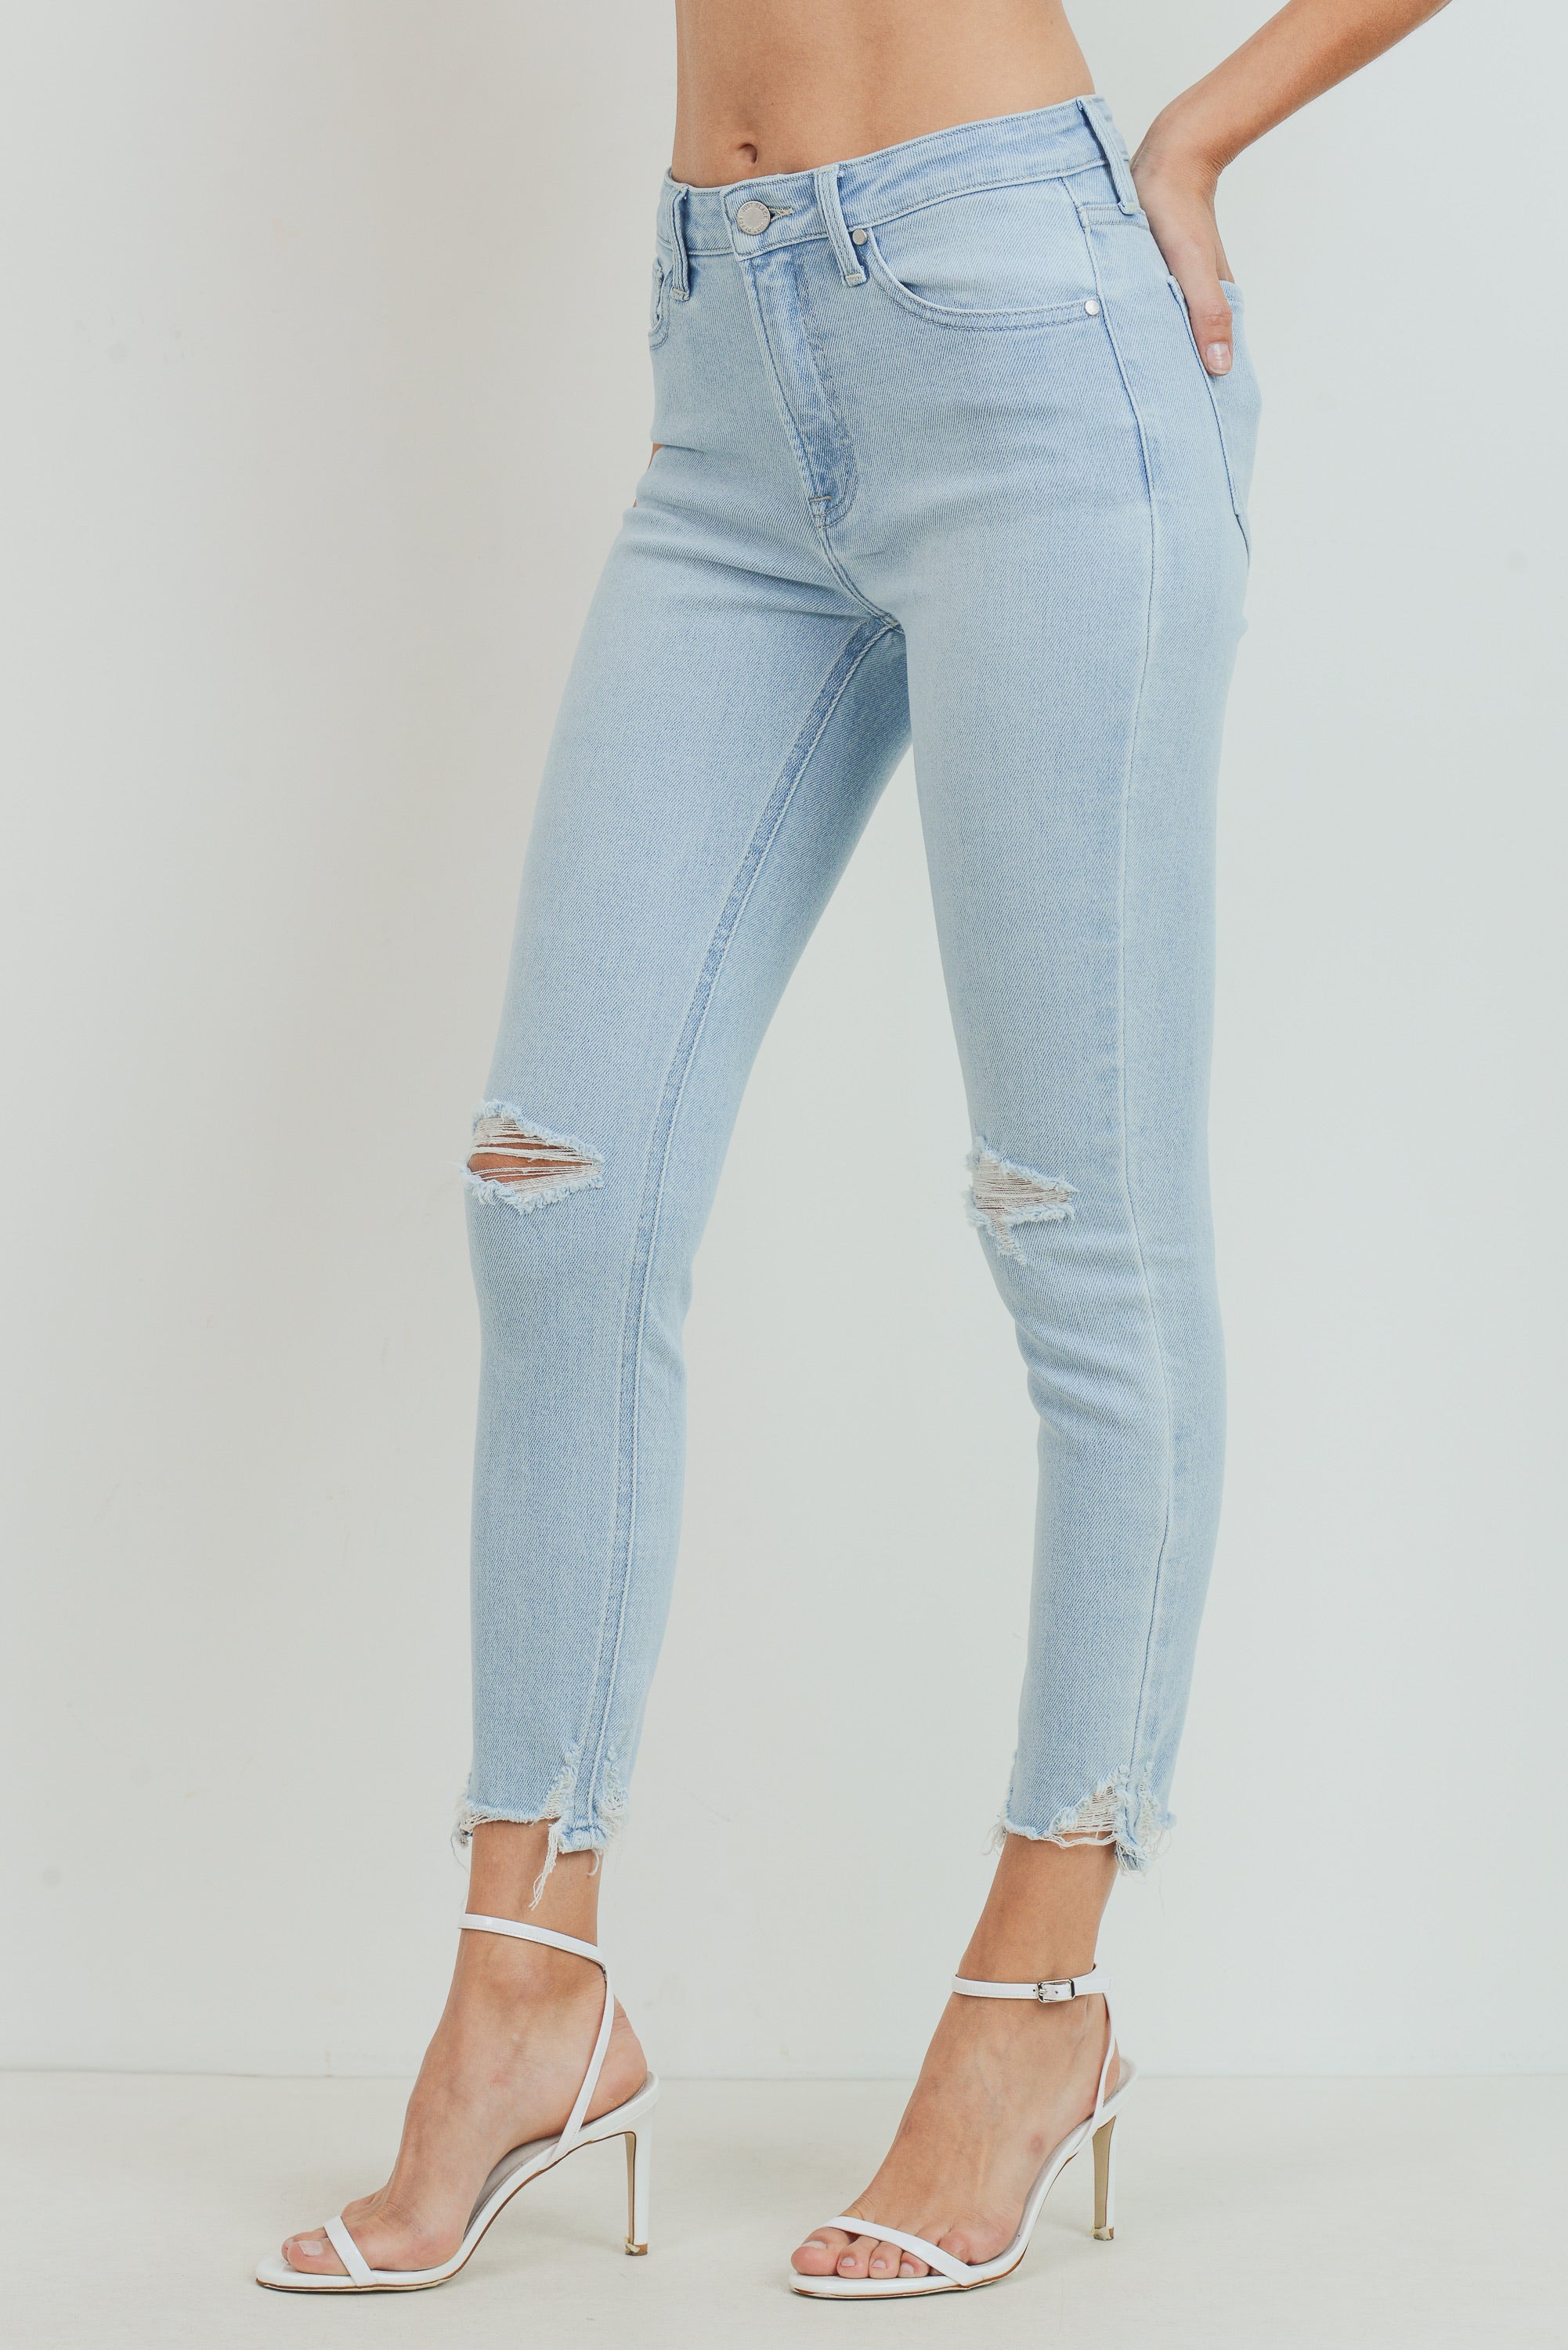 Distressed Knee & Ankle jeans